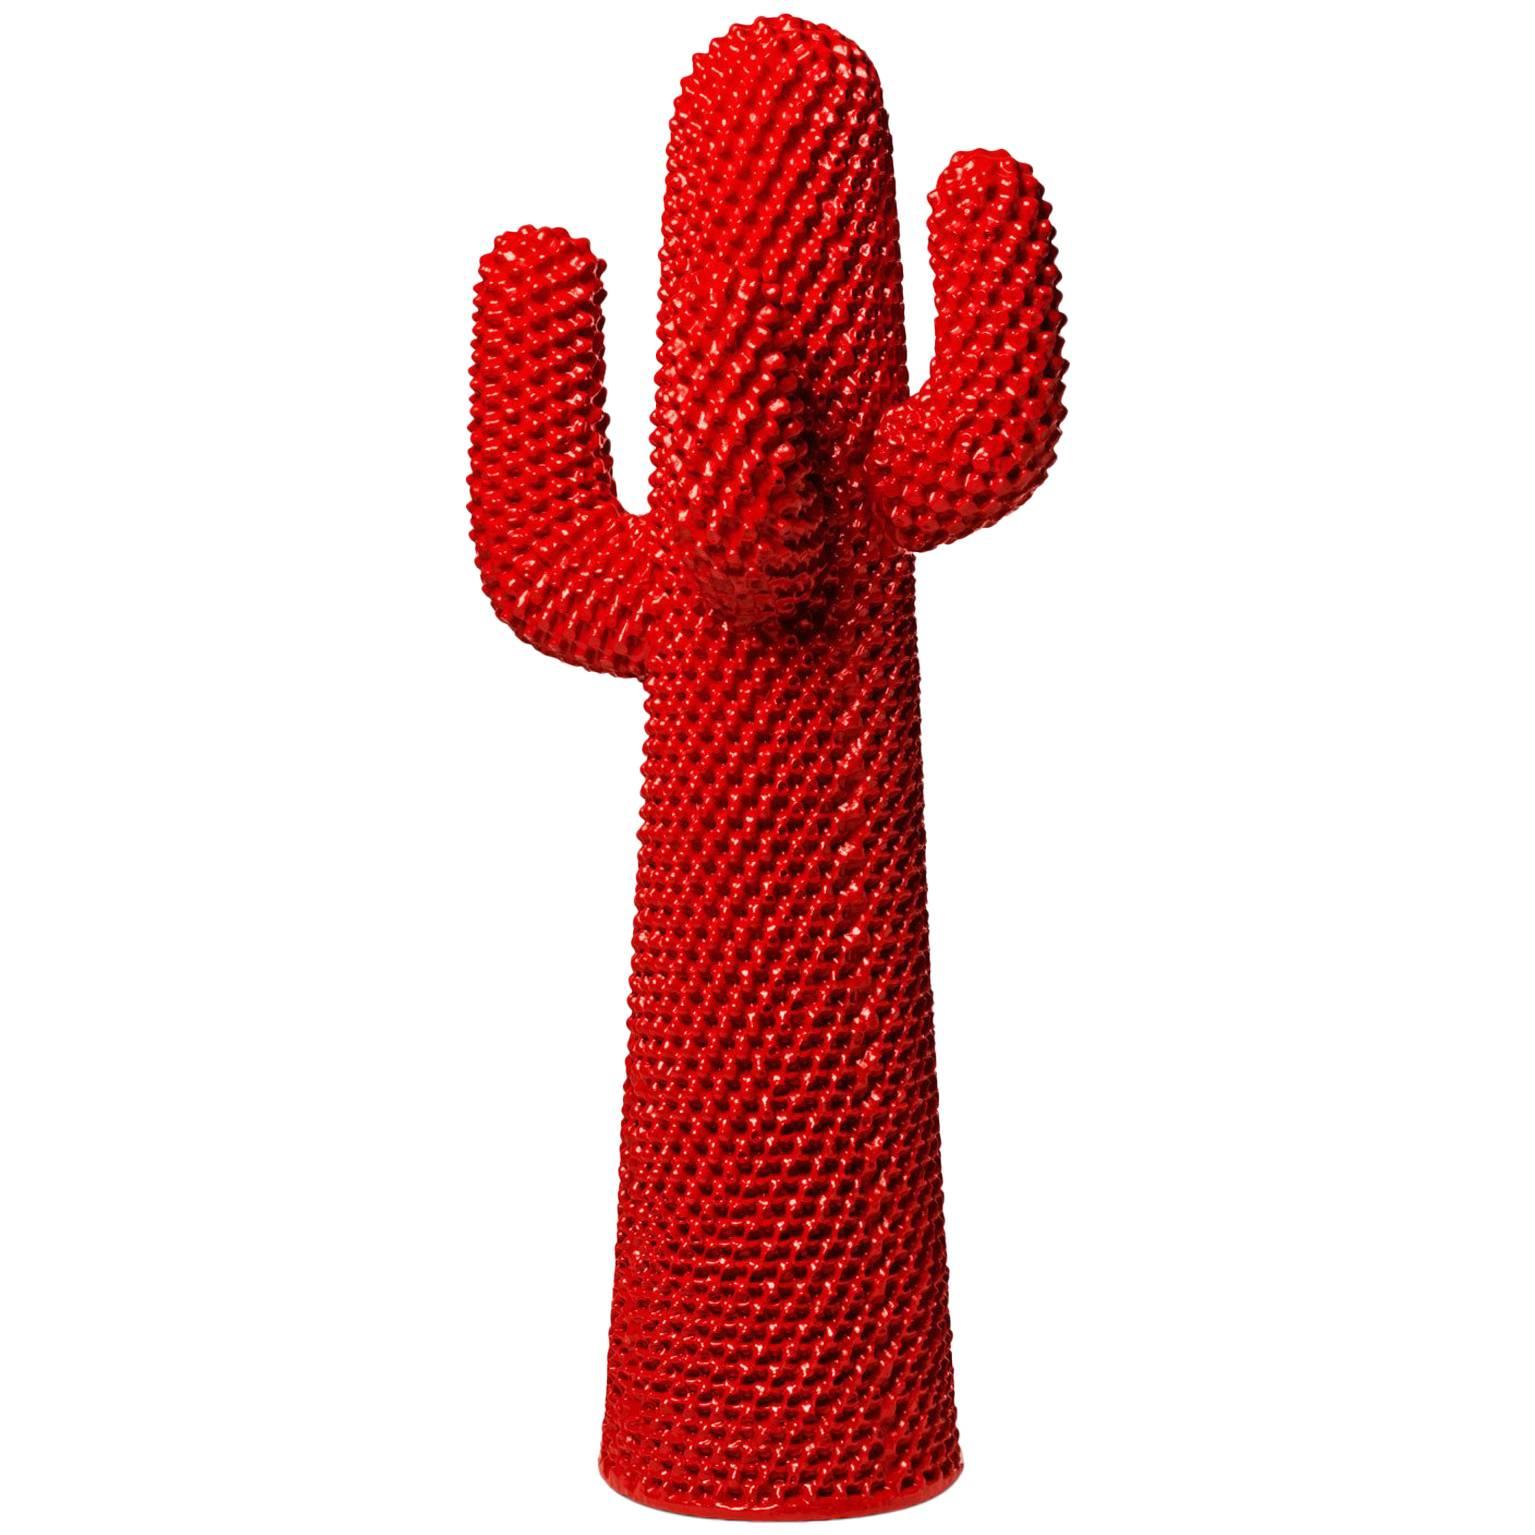 Gufram Rosso Cactus Coat Hanger by Guido Drocco and Franco Mello For Sale